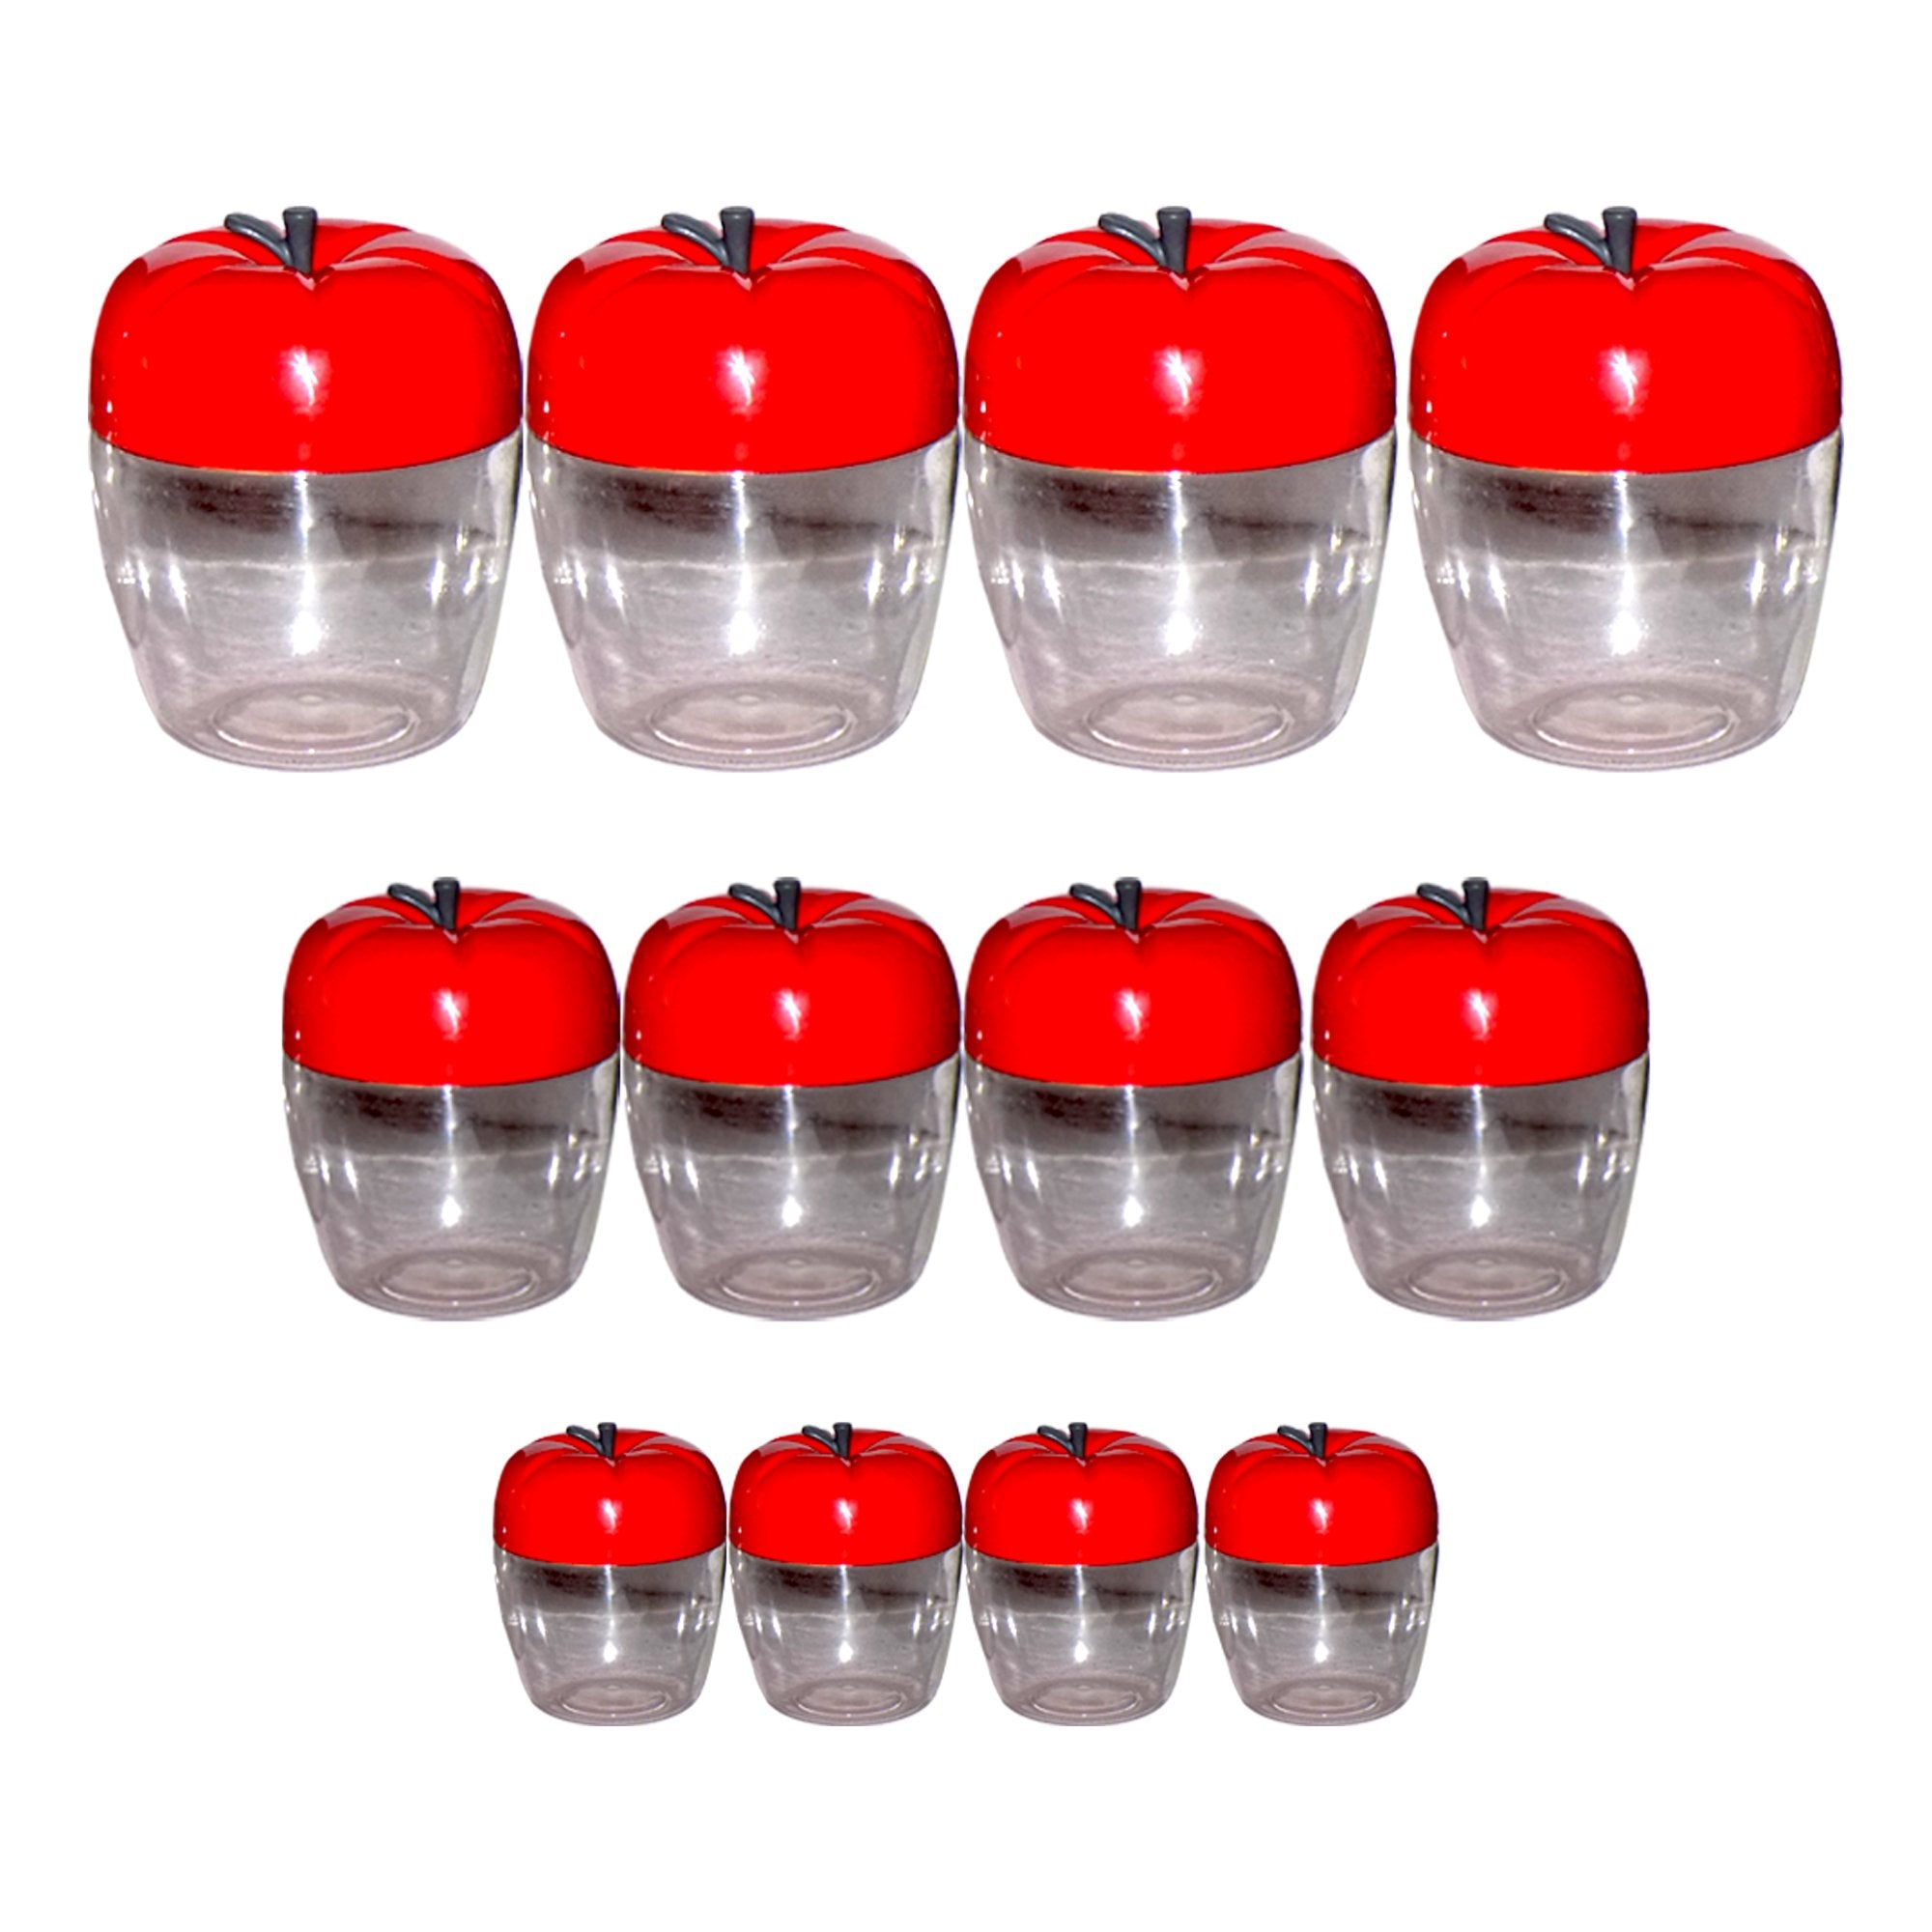 2274 Air Tight Apple Shape Storage Container - 500 ml, 800 ml and 1500 ml (4 Pcs Each Size, 12 Pcs) - SkyShopy